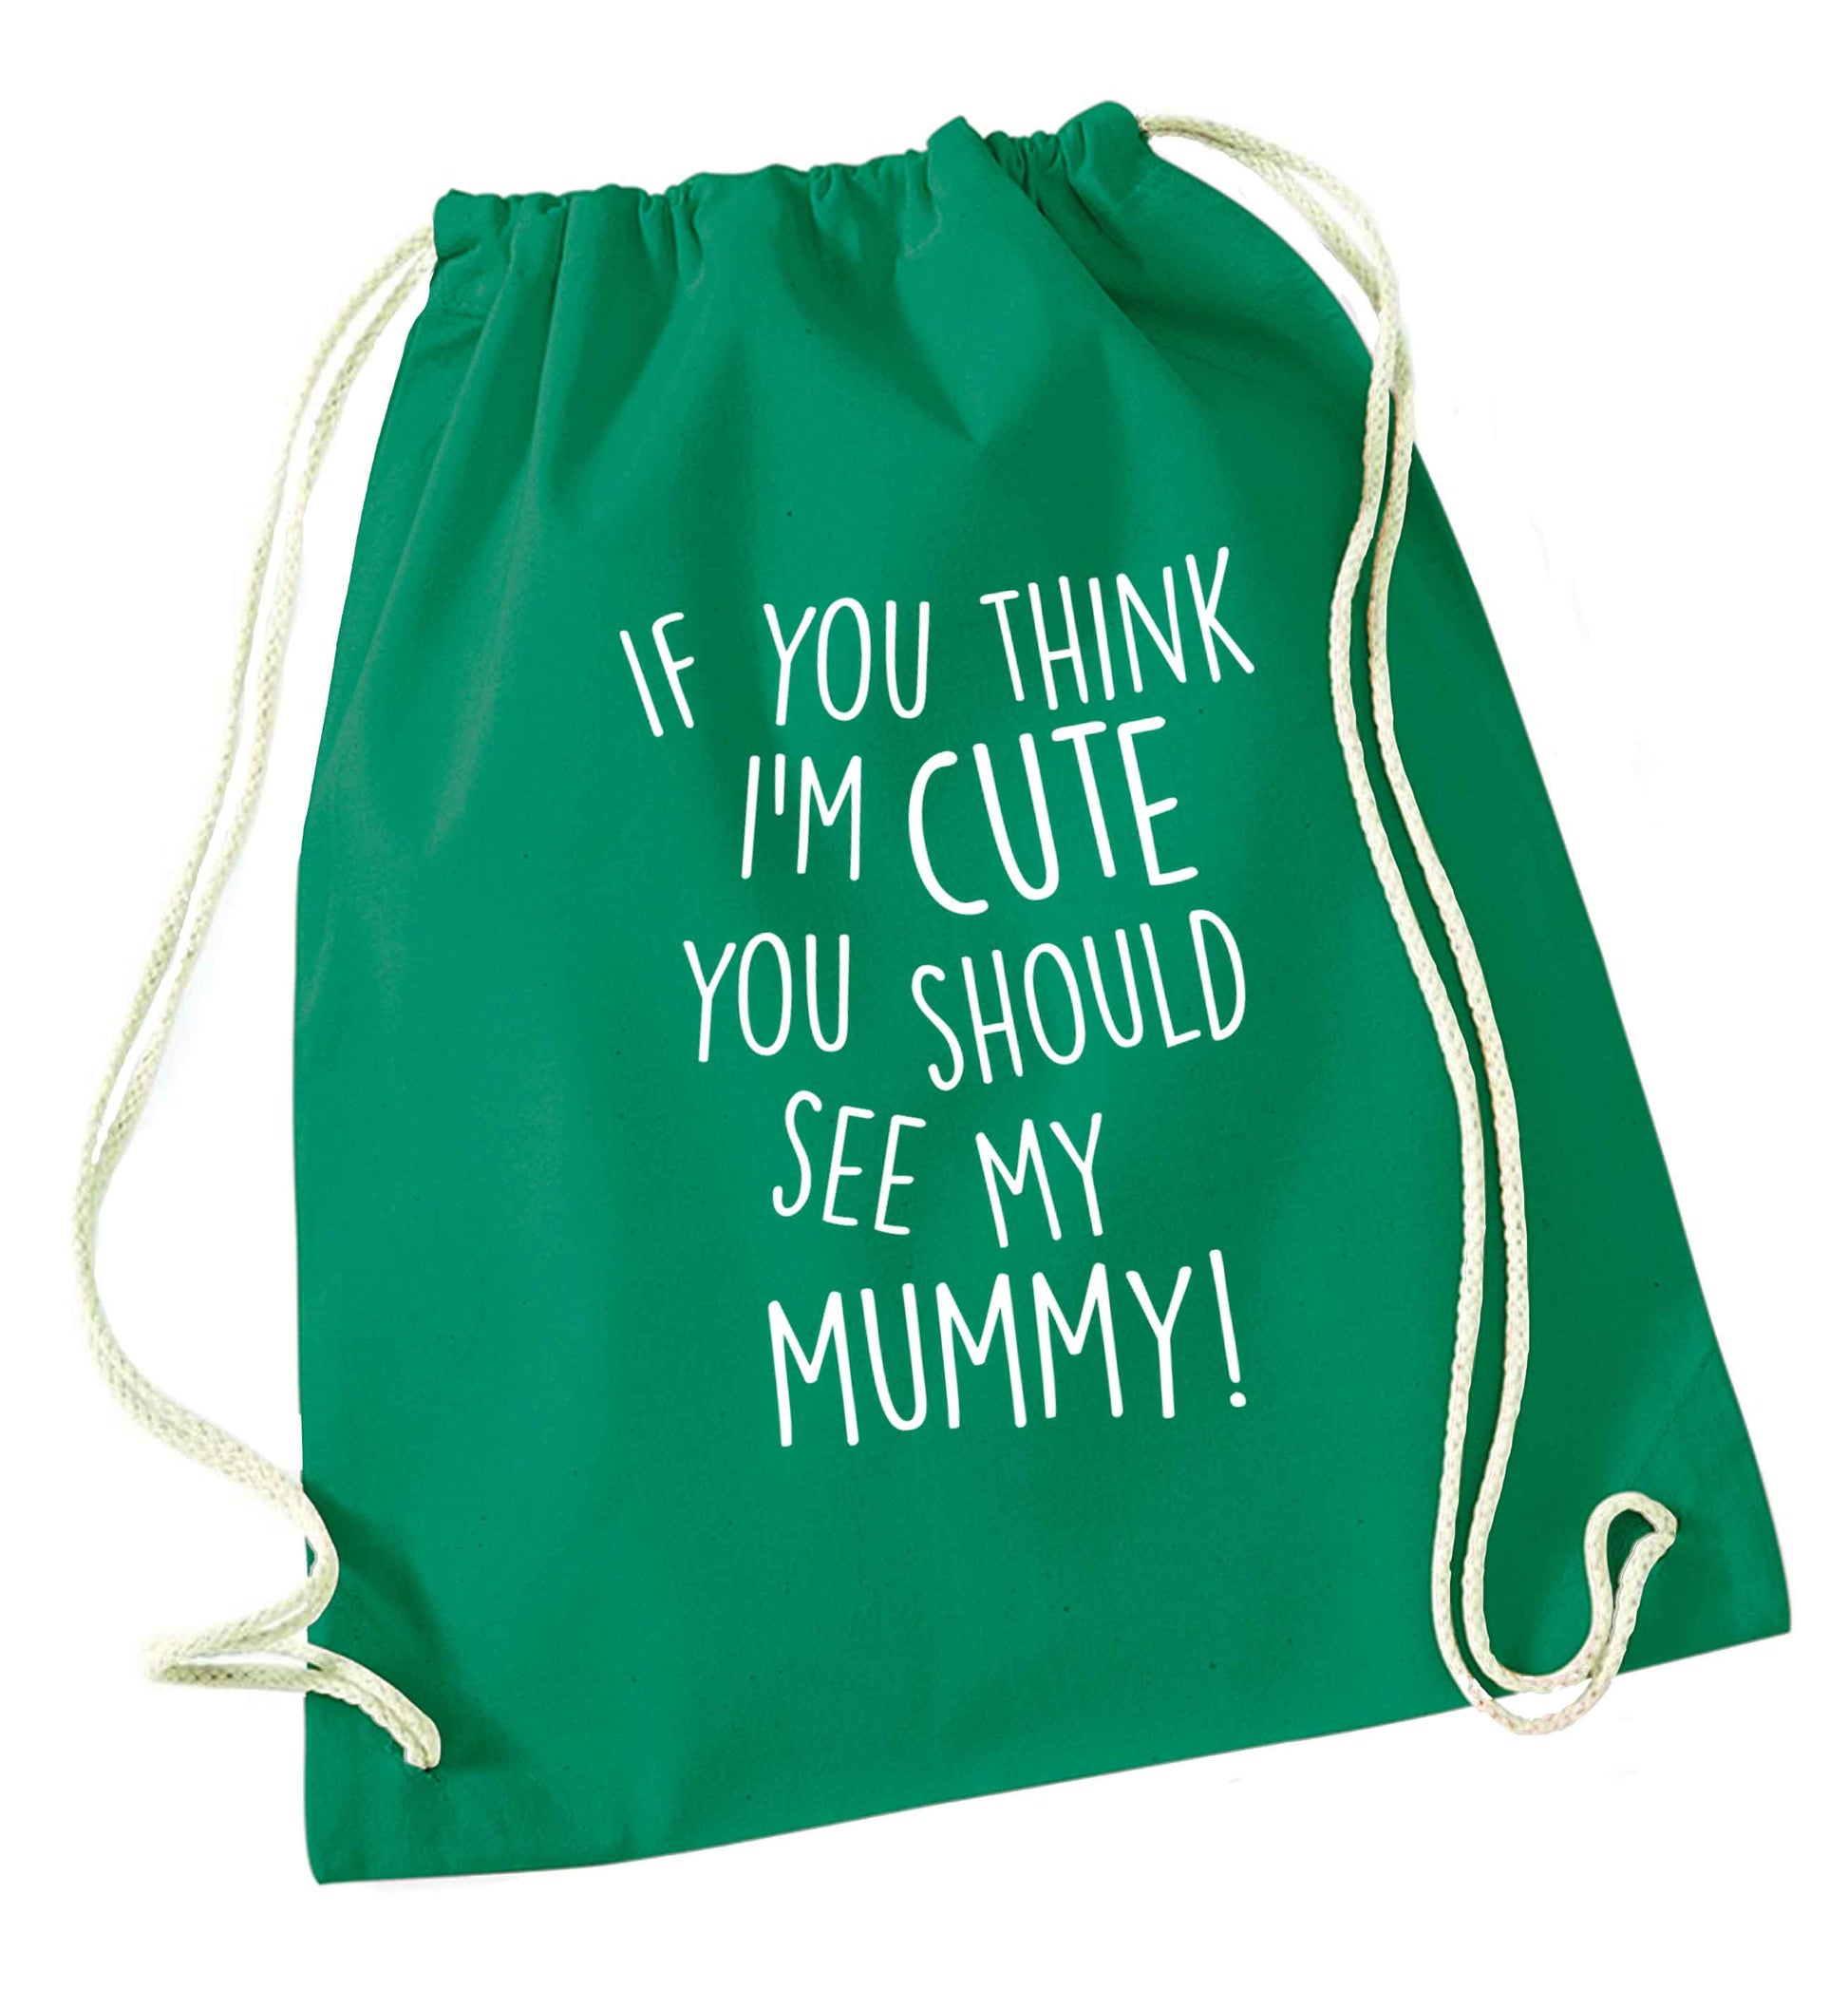 If you think I'm cute you should see my mummy green drawstring bag